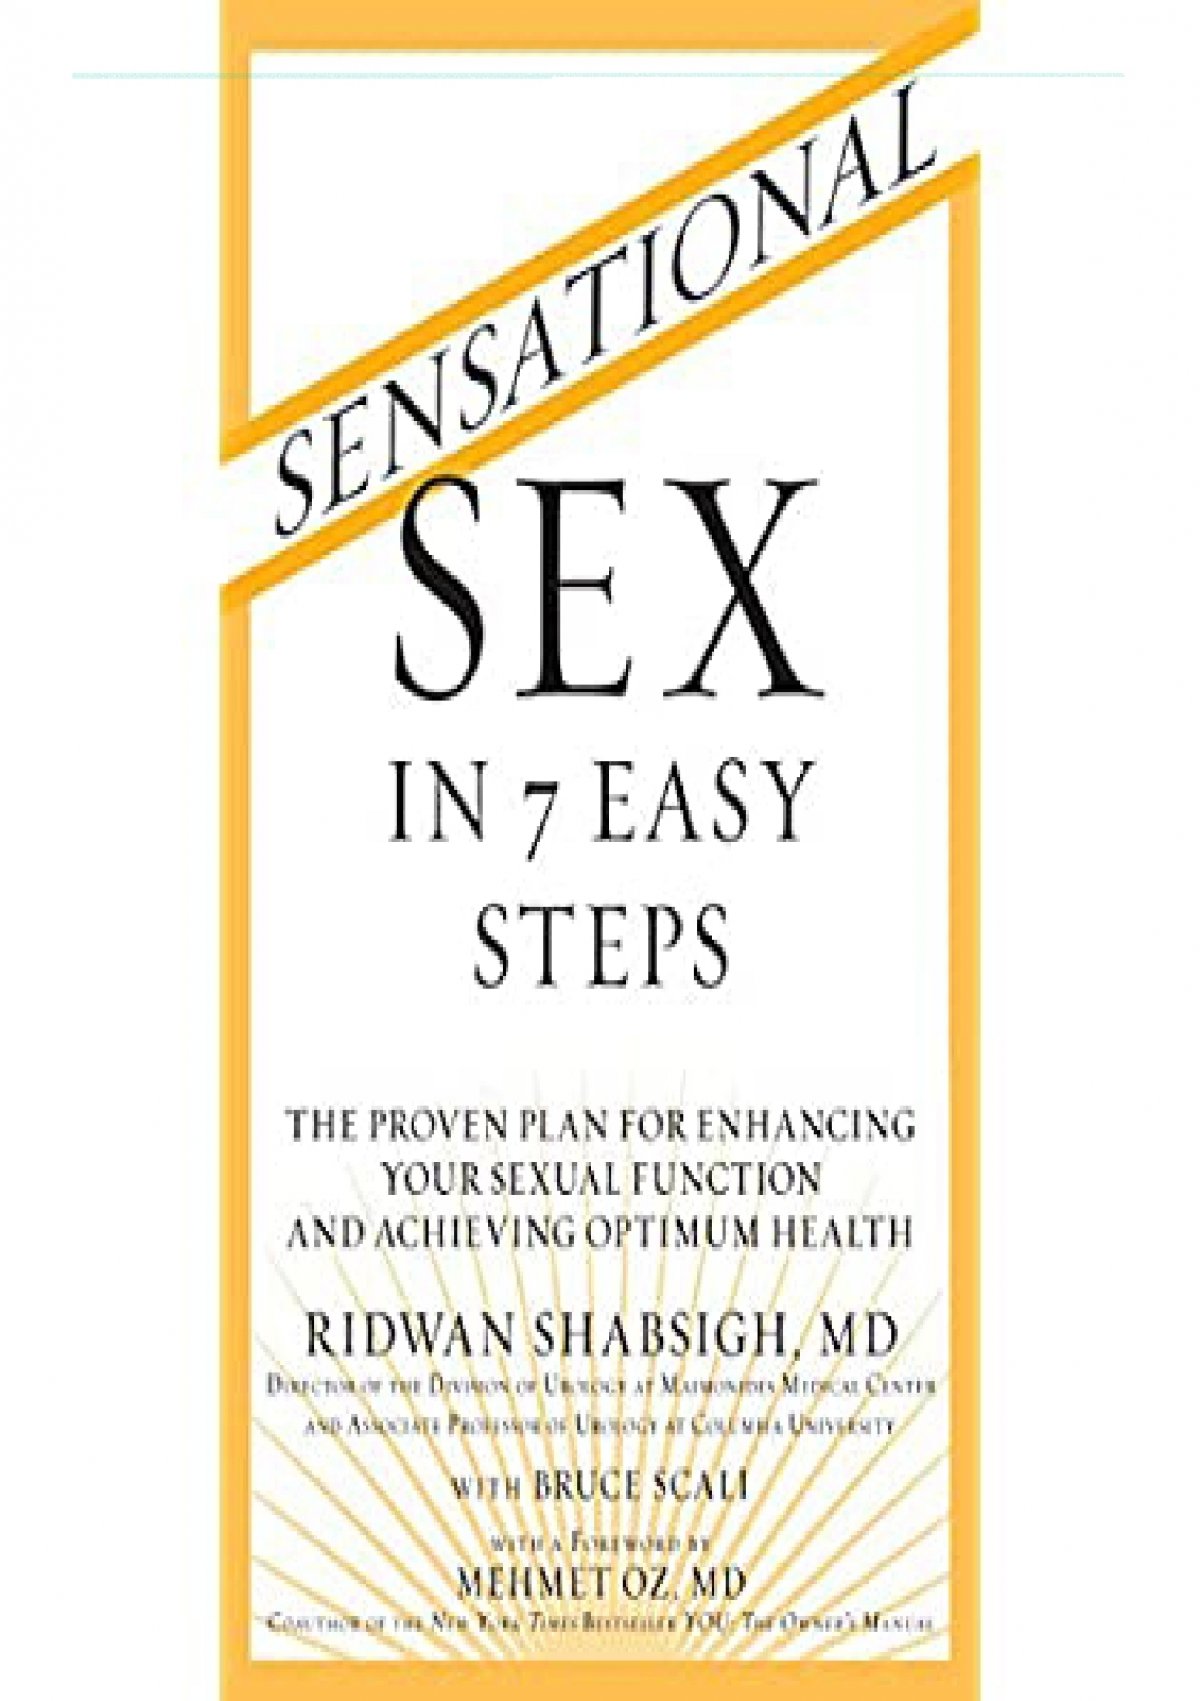 Pdf Sensational Sex In 7 Easy Steps The Proven Plan For Enhancing Your Sexual Function And 5774